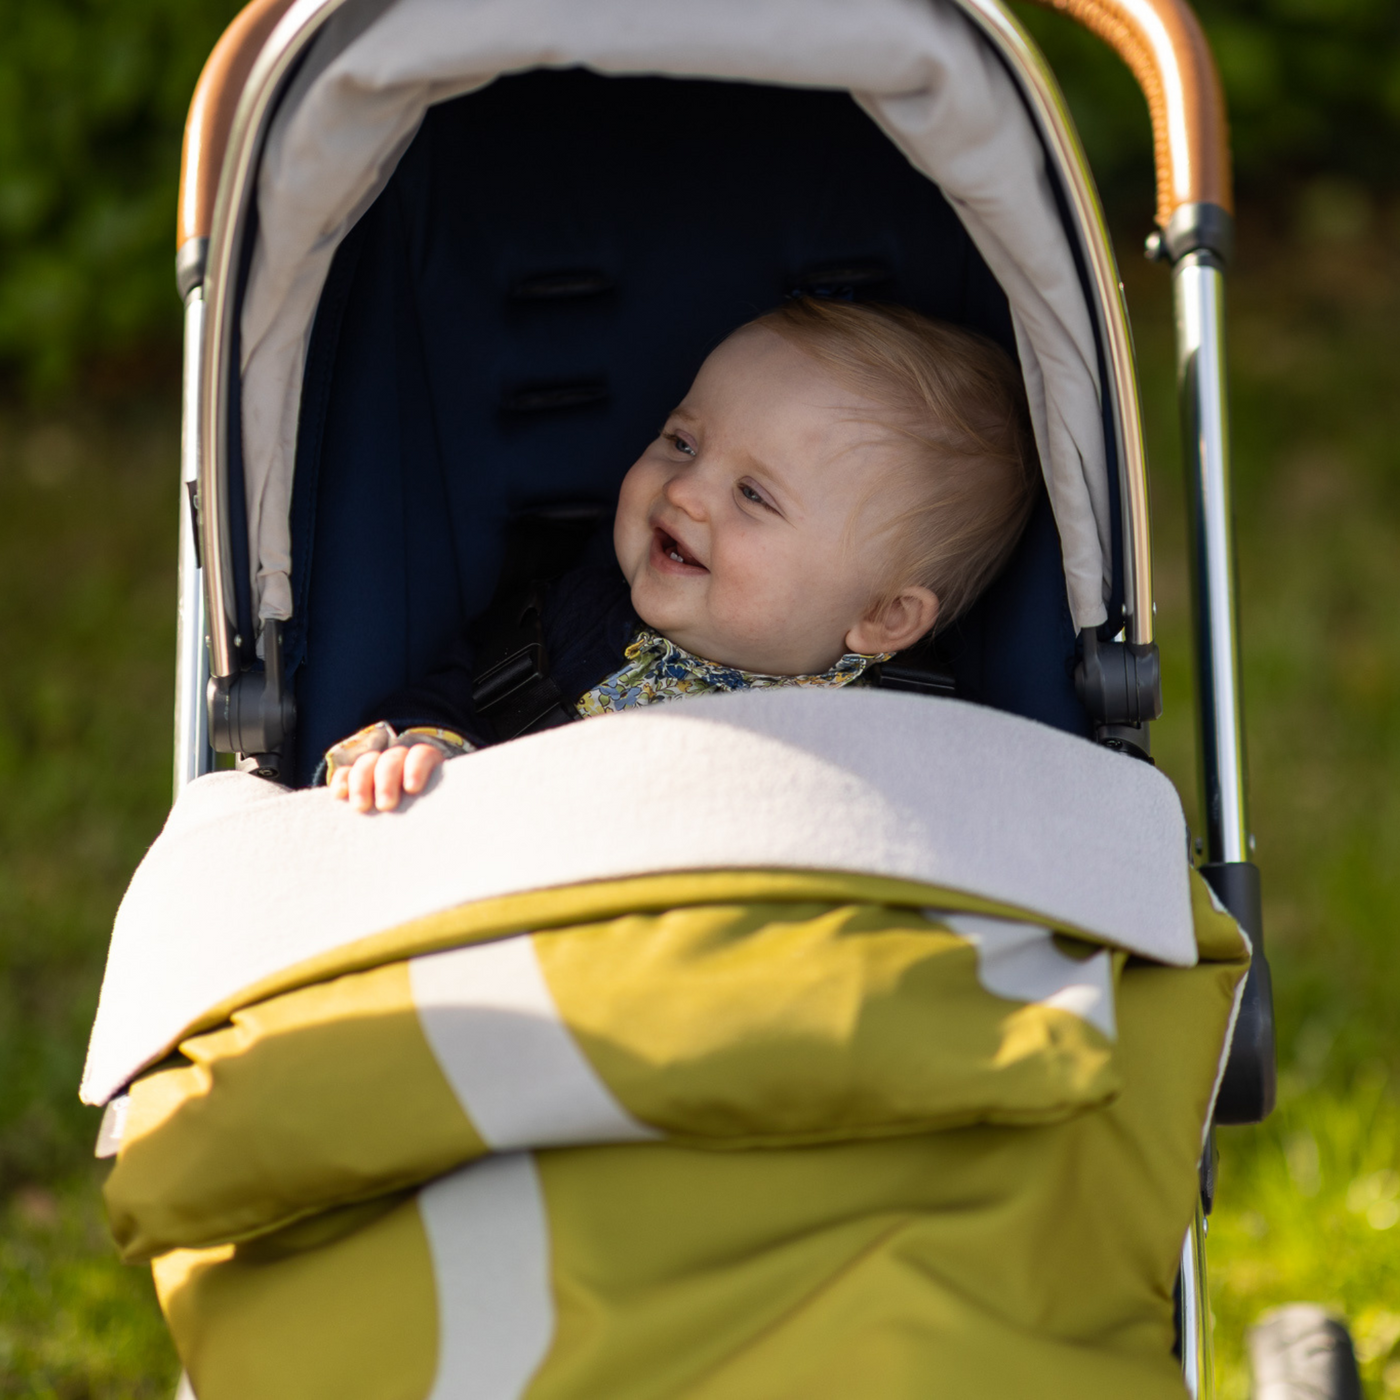 Baby smiling in stroller with BlinkyWarm in Olive